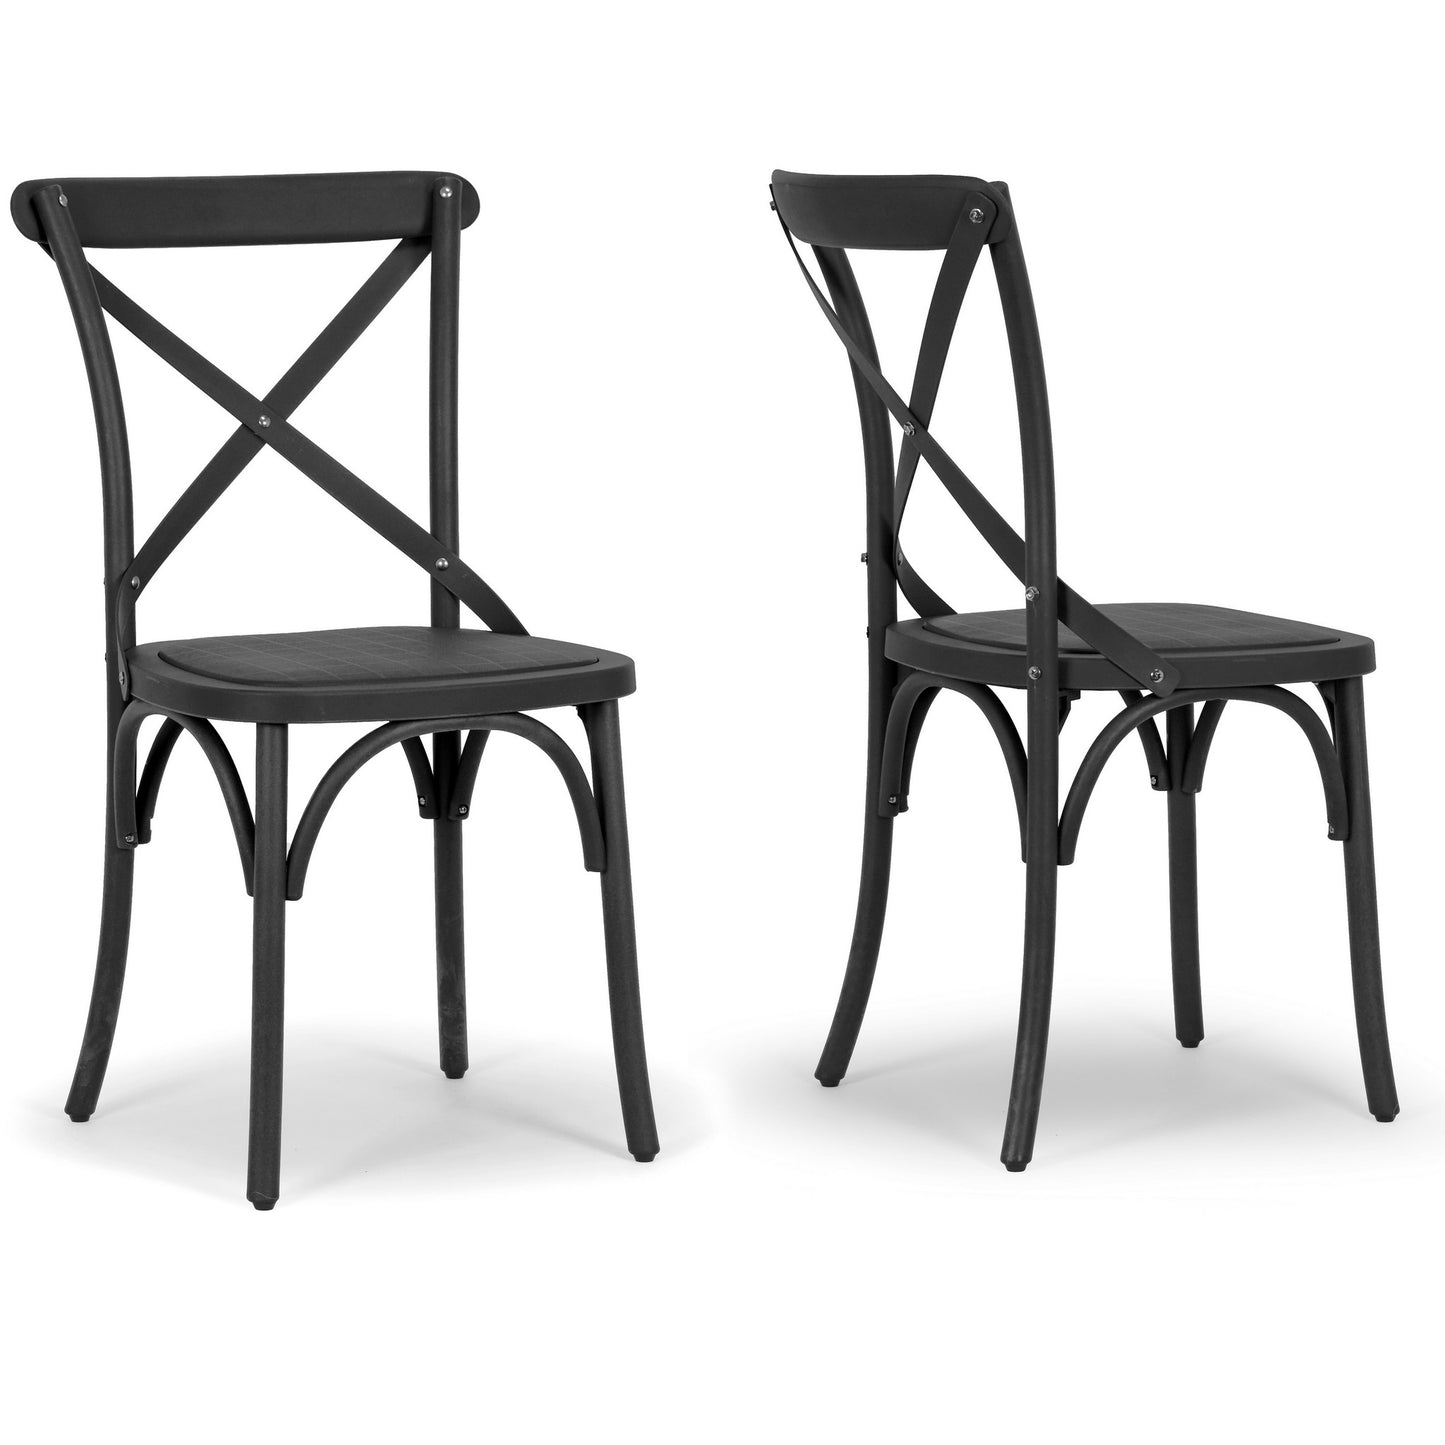 Set of 2 Aleah Outdoor Indoor Dining Chair Cross Back Chairs in Black